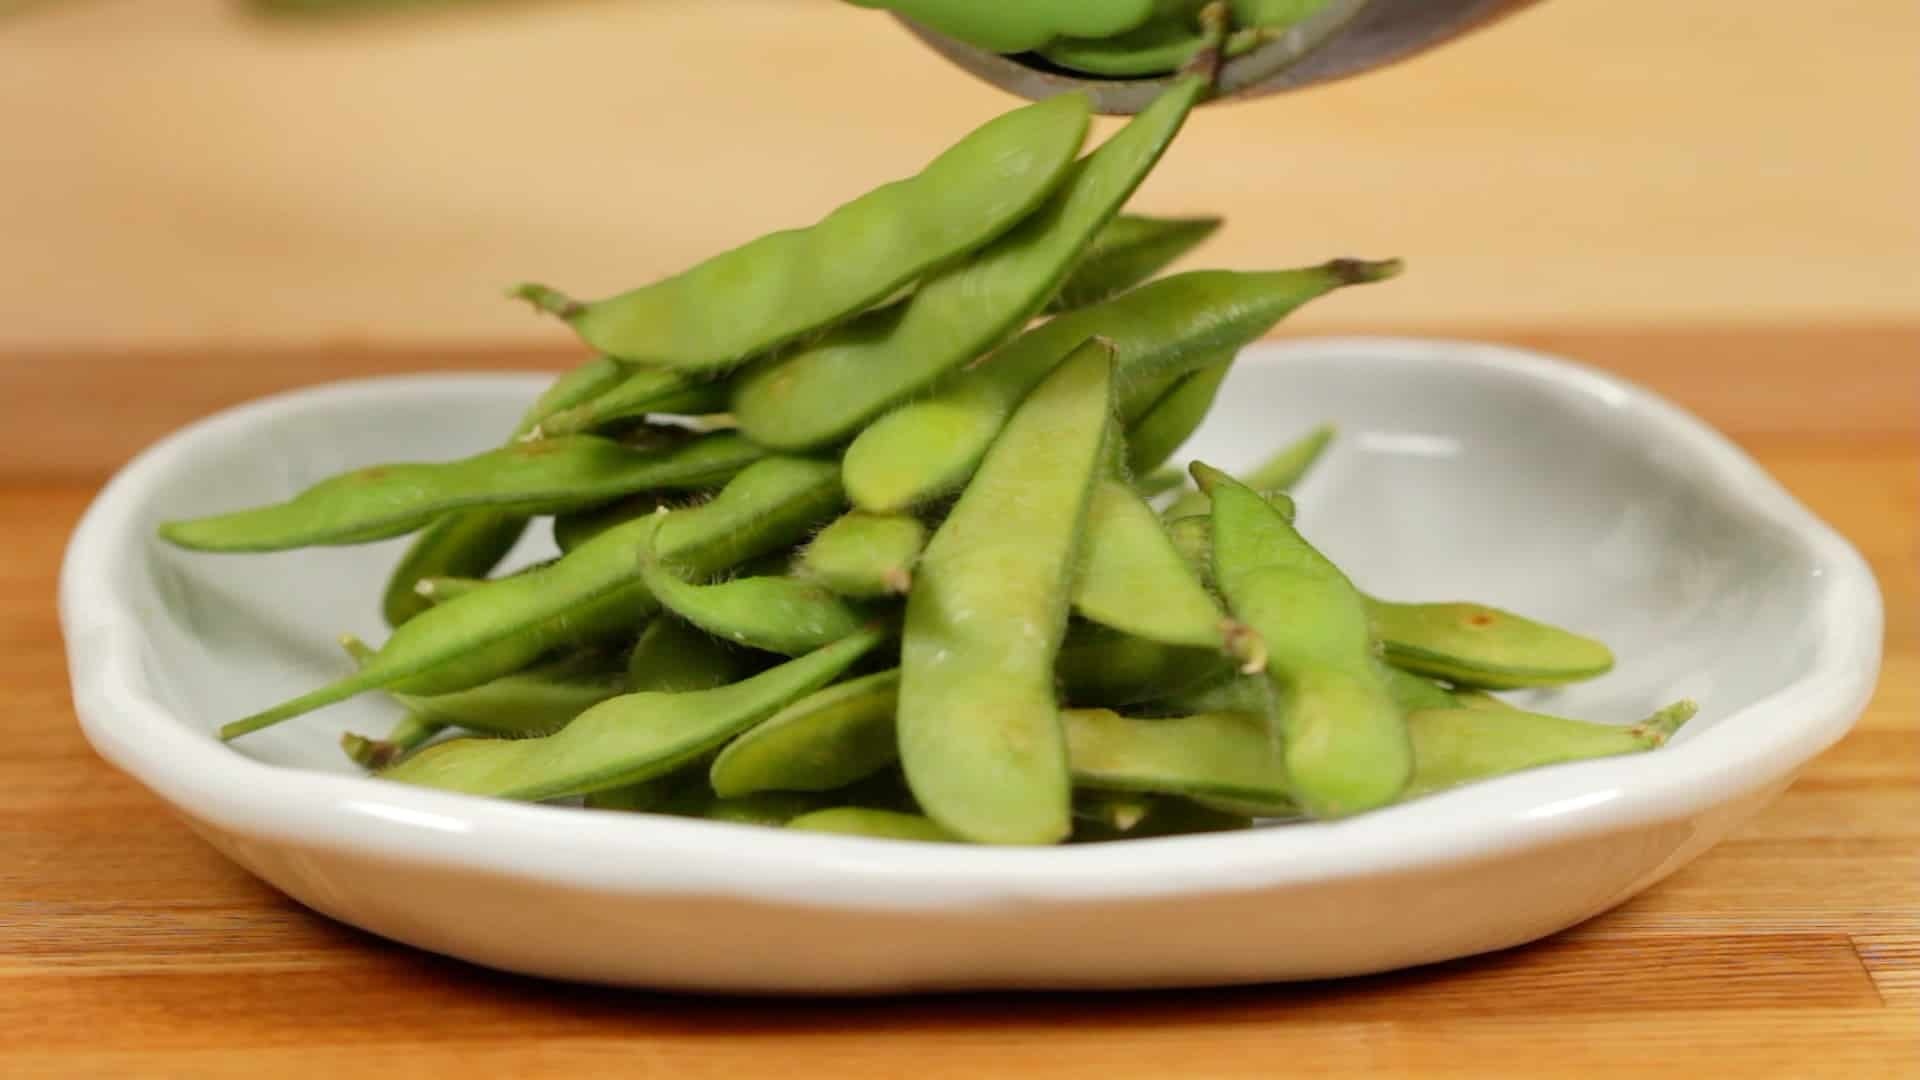 Delicious edamame beans, Cooking with dog, Edamame recipe, 1920x1080 Full HD Desktop